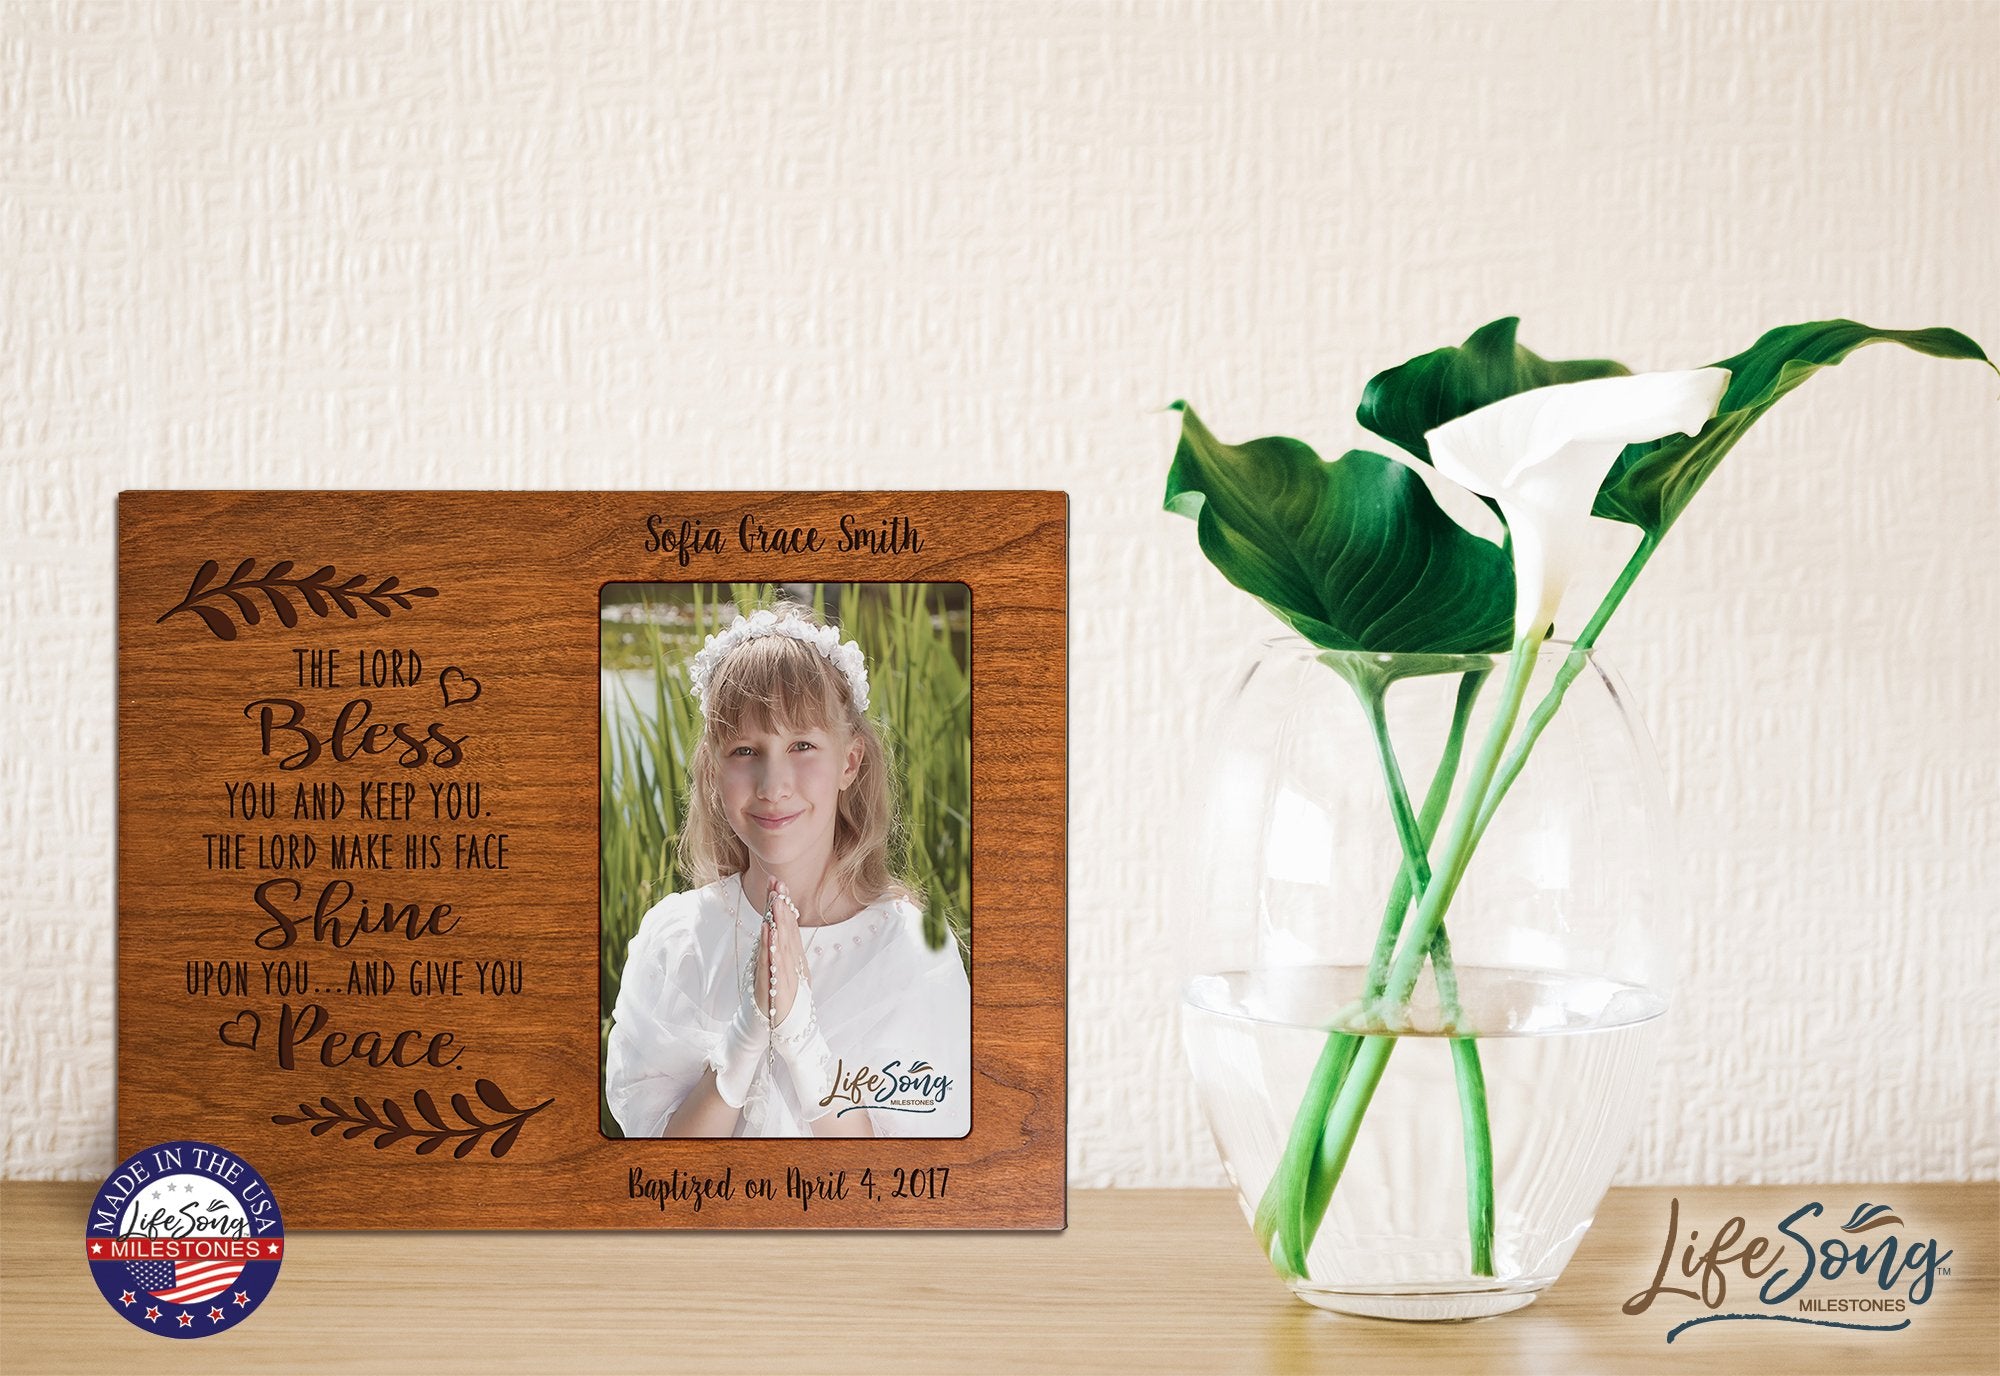 Personalized Baptized Photo Frame - The Lord Bless cherry